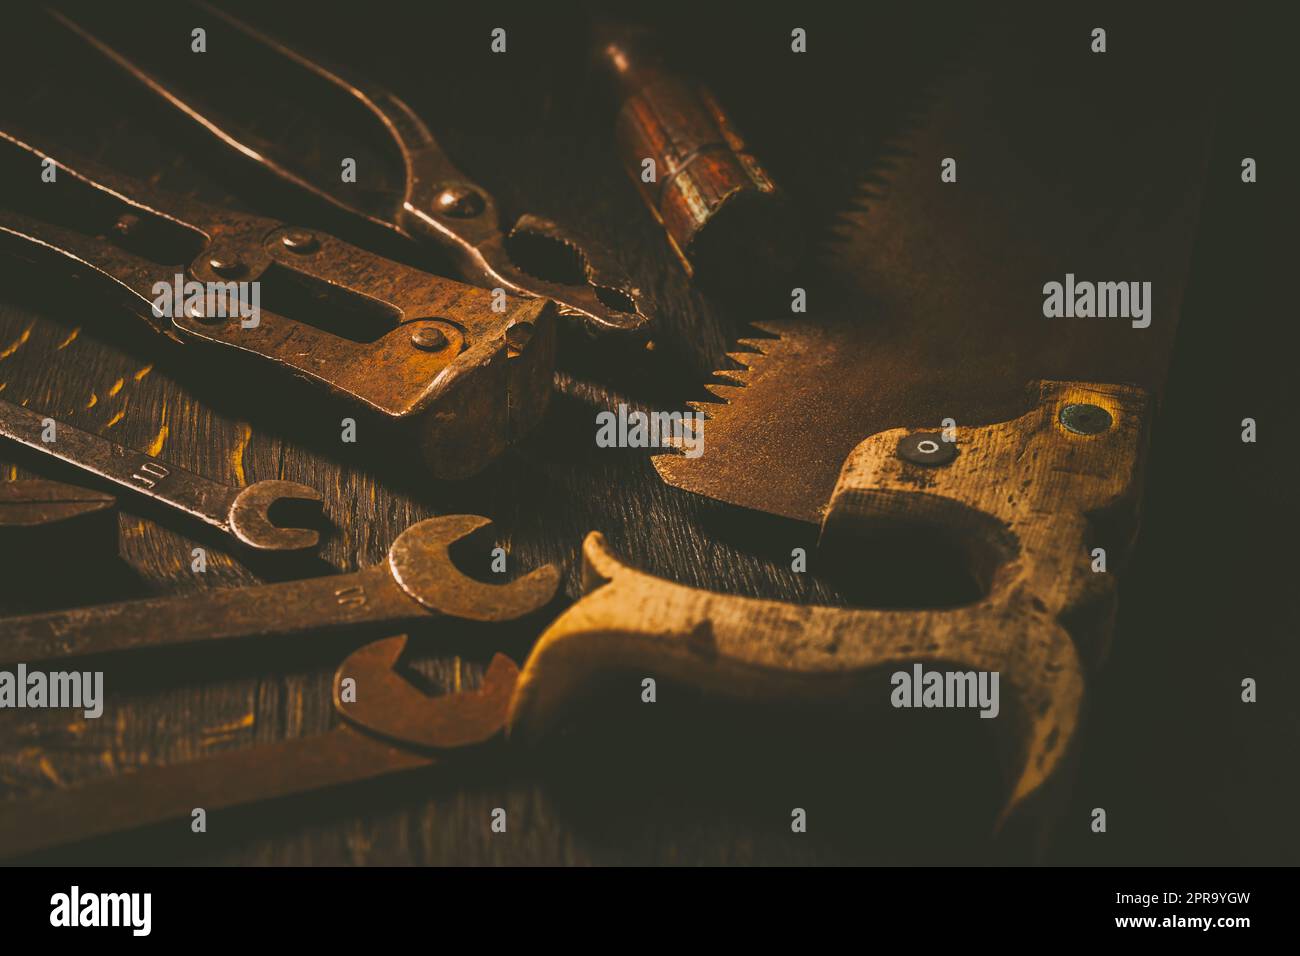 Collection of vintage carpentry tools on old workbench: woodworking, craftsmanship Stock Photo